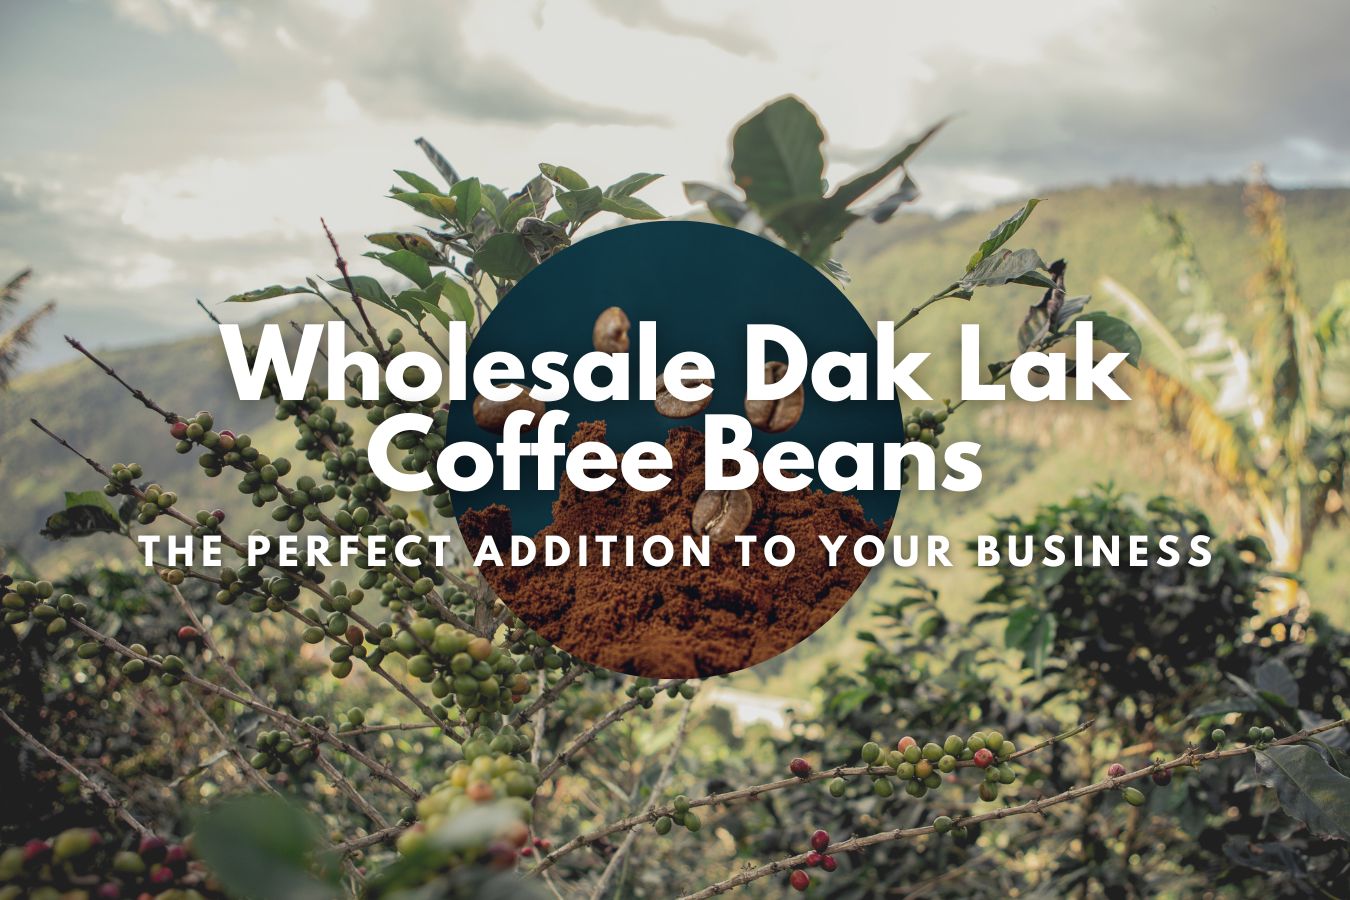 Wholesale Dak Lak Coffee Beans The Perfect Addition to Your Business